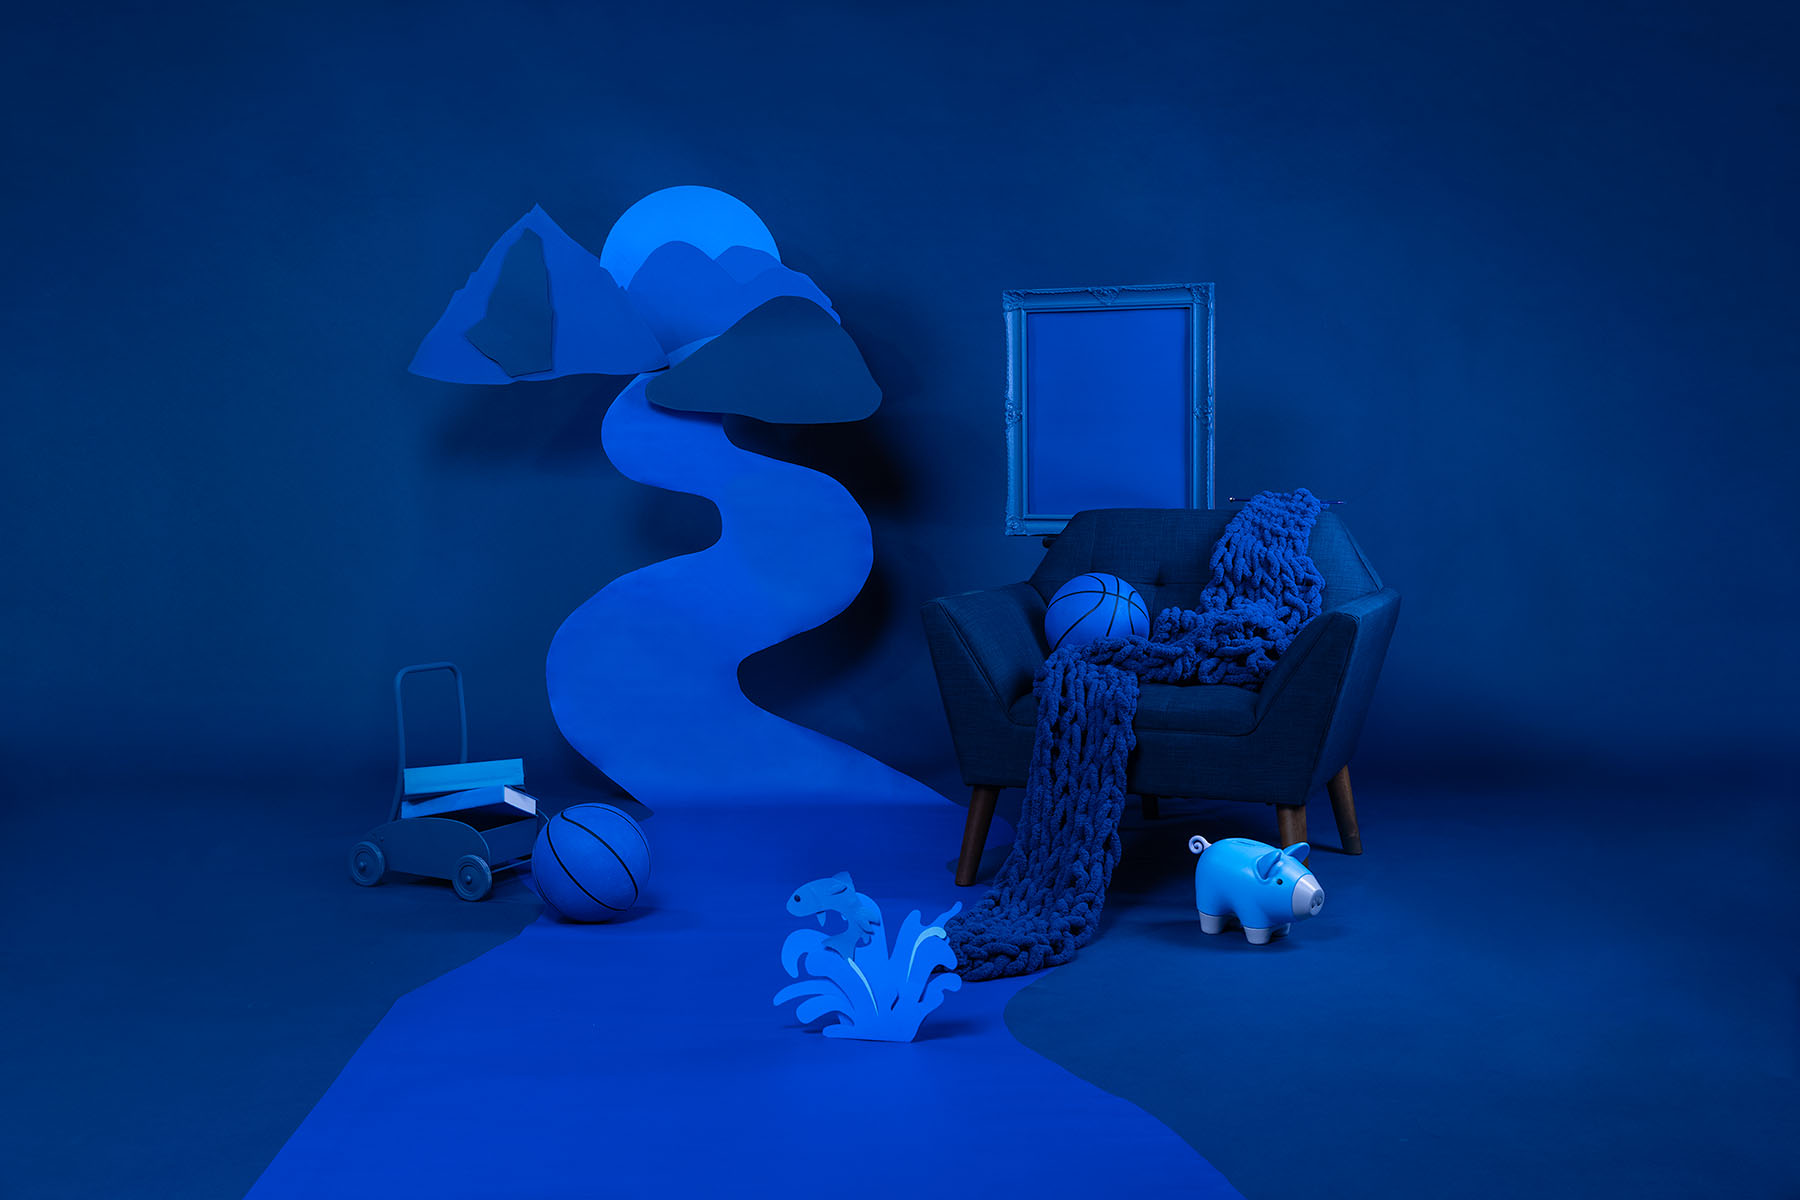 A blue background with a blue chair with a blue backetball on the seat and blue yarn scarf drapped over it. A mountain scene with a river is cut out of different shades of blue paper and hung in the background. There is a blue frame hung and blue children's toys scattered about.